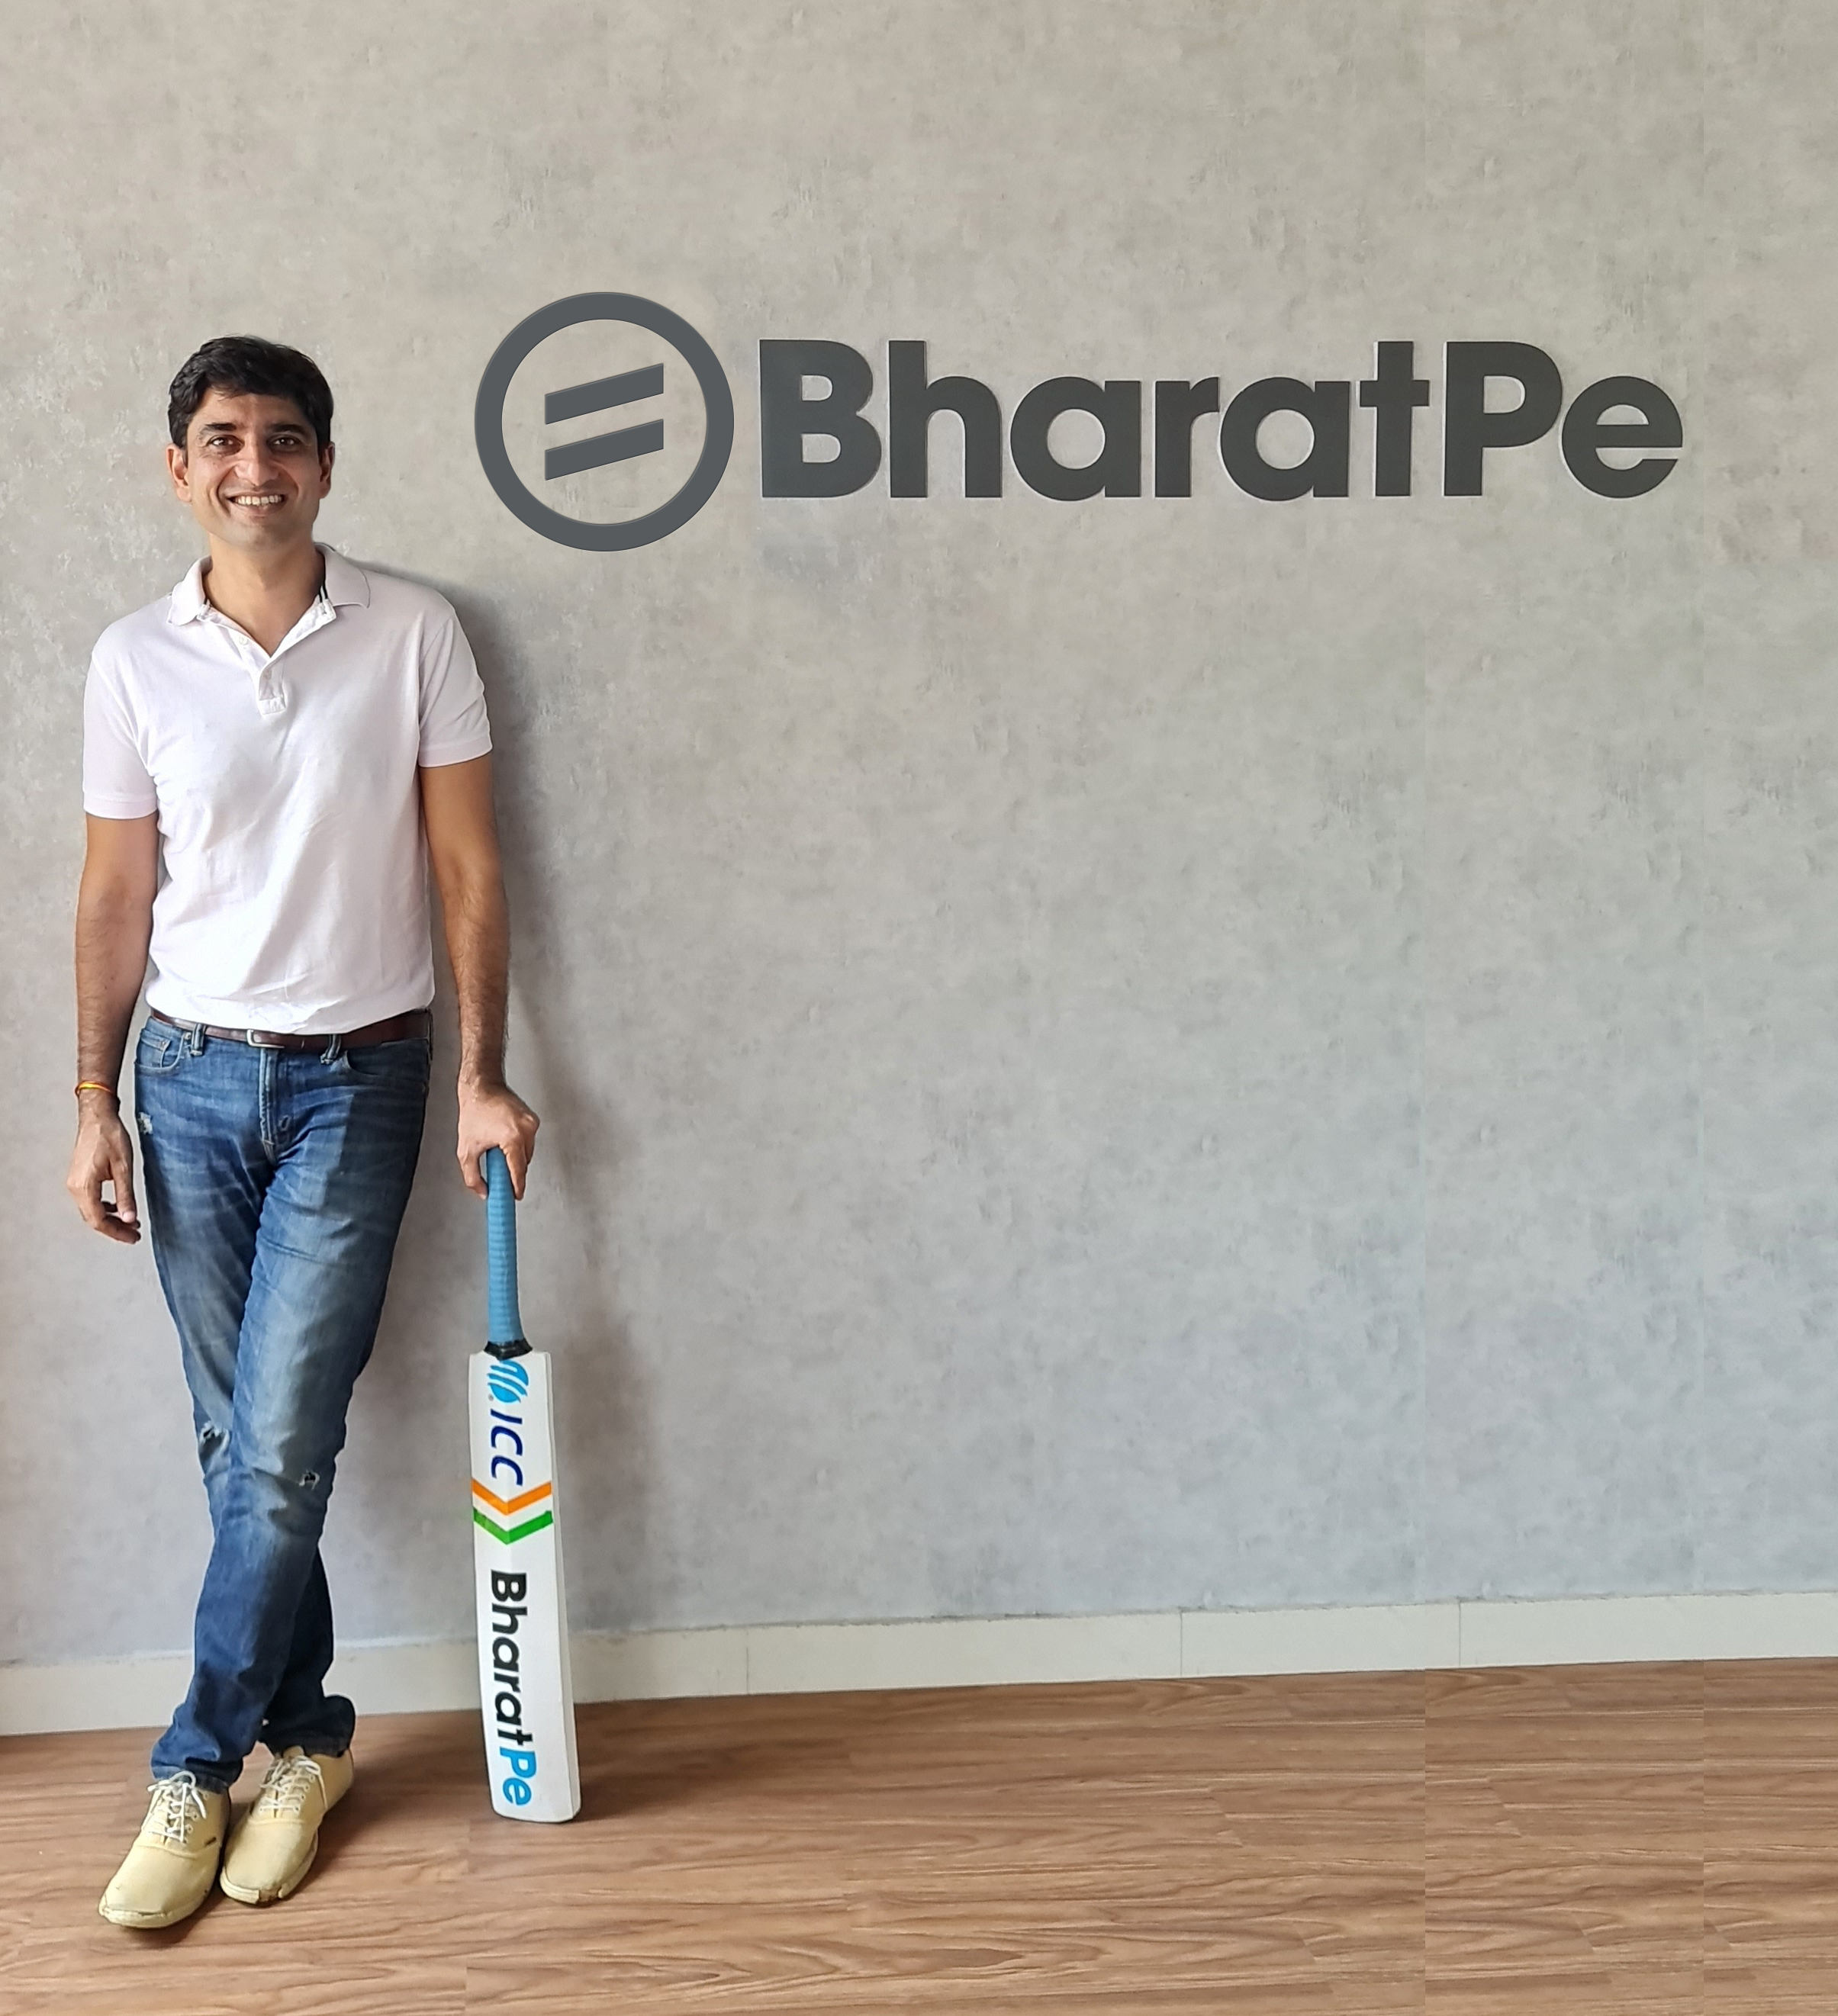 bharatpe-raises-us-370-mn-in-series-e-at-us-2-85-bn-valuation